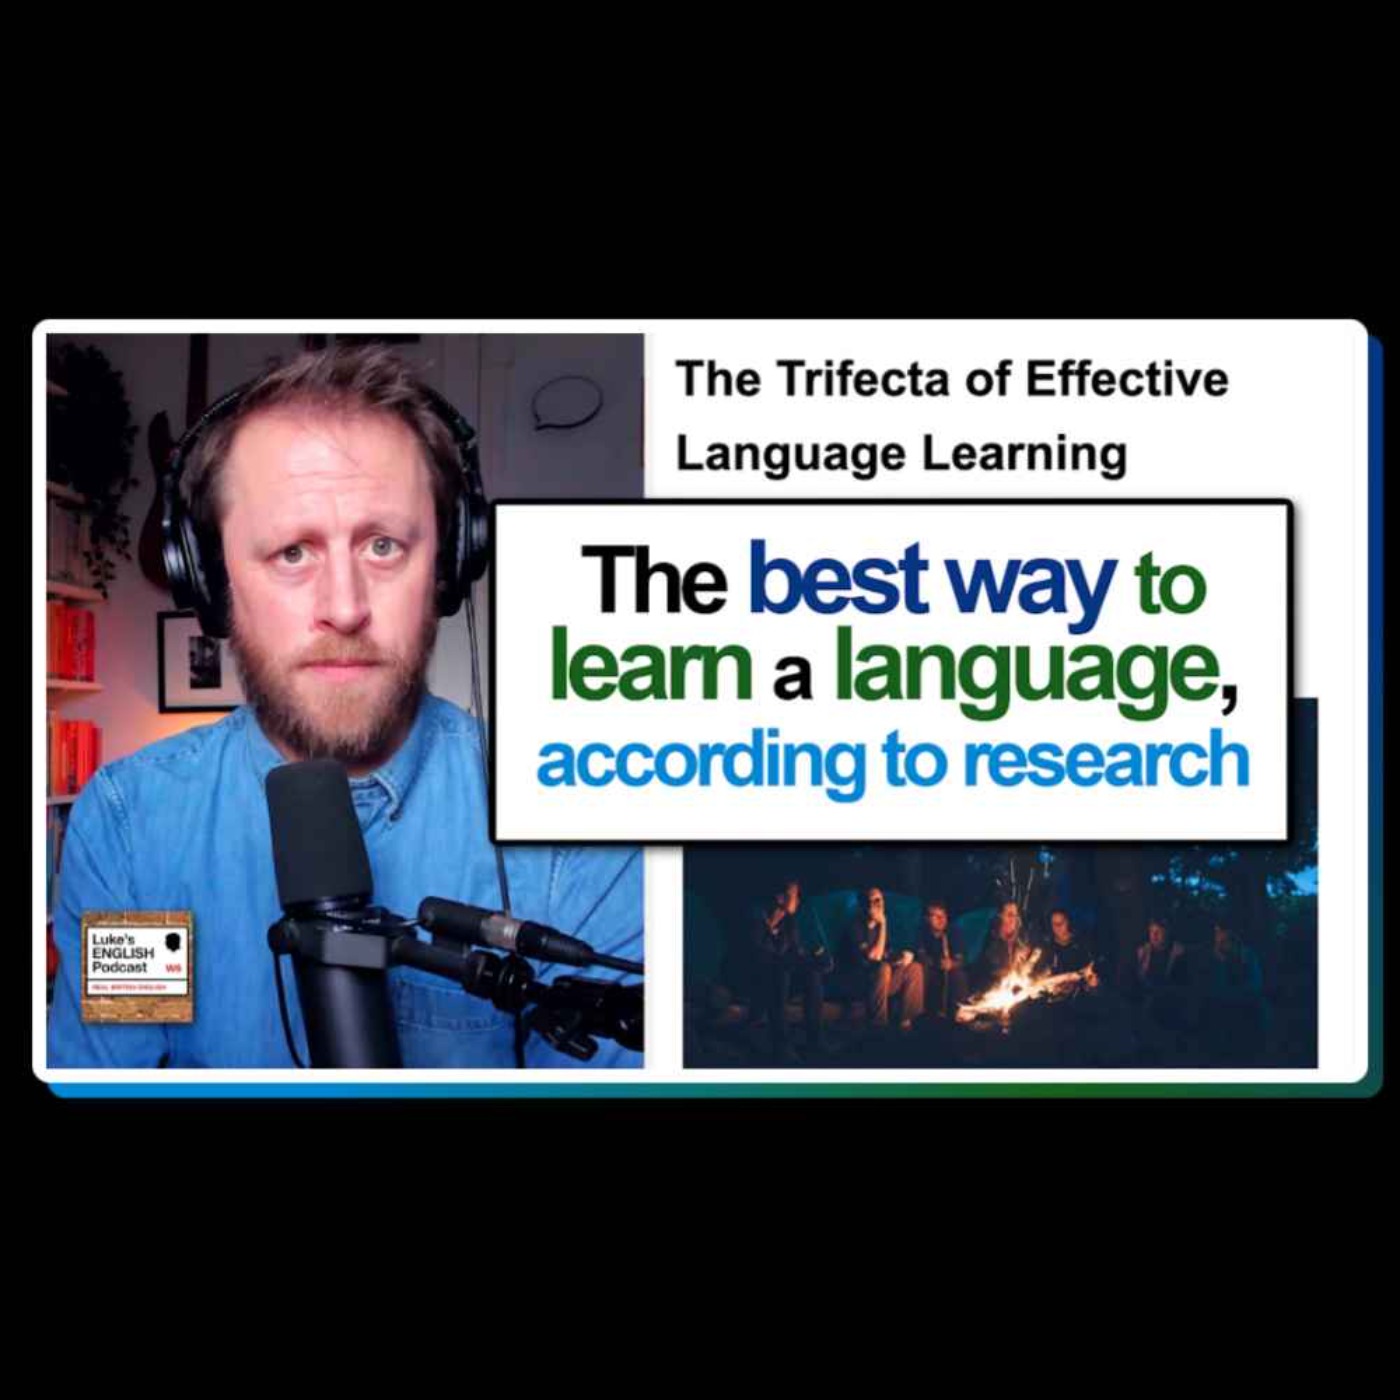 834. The best way to learn a language, according to research (Article)